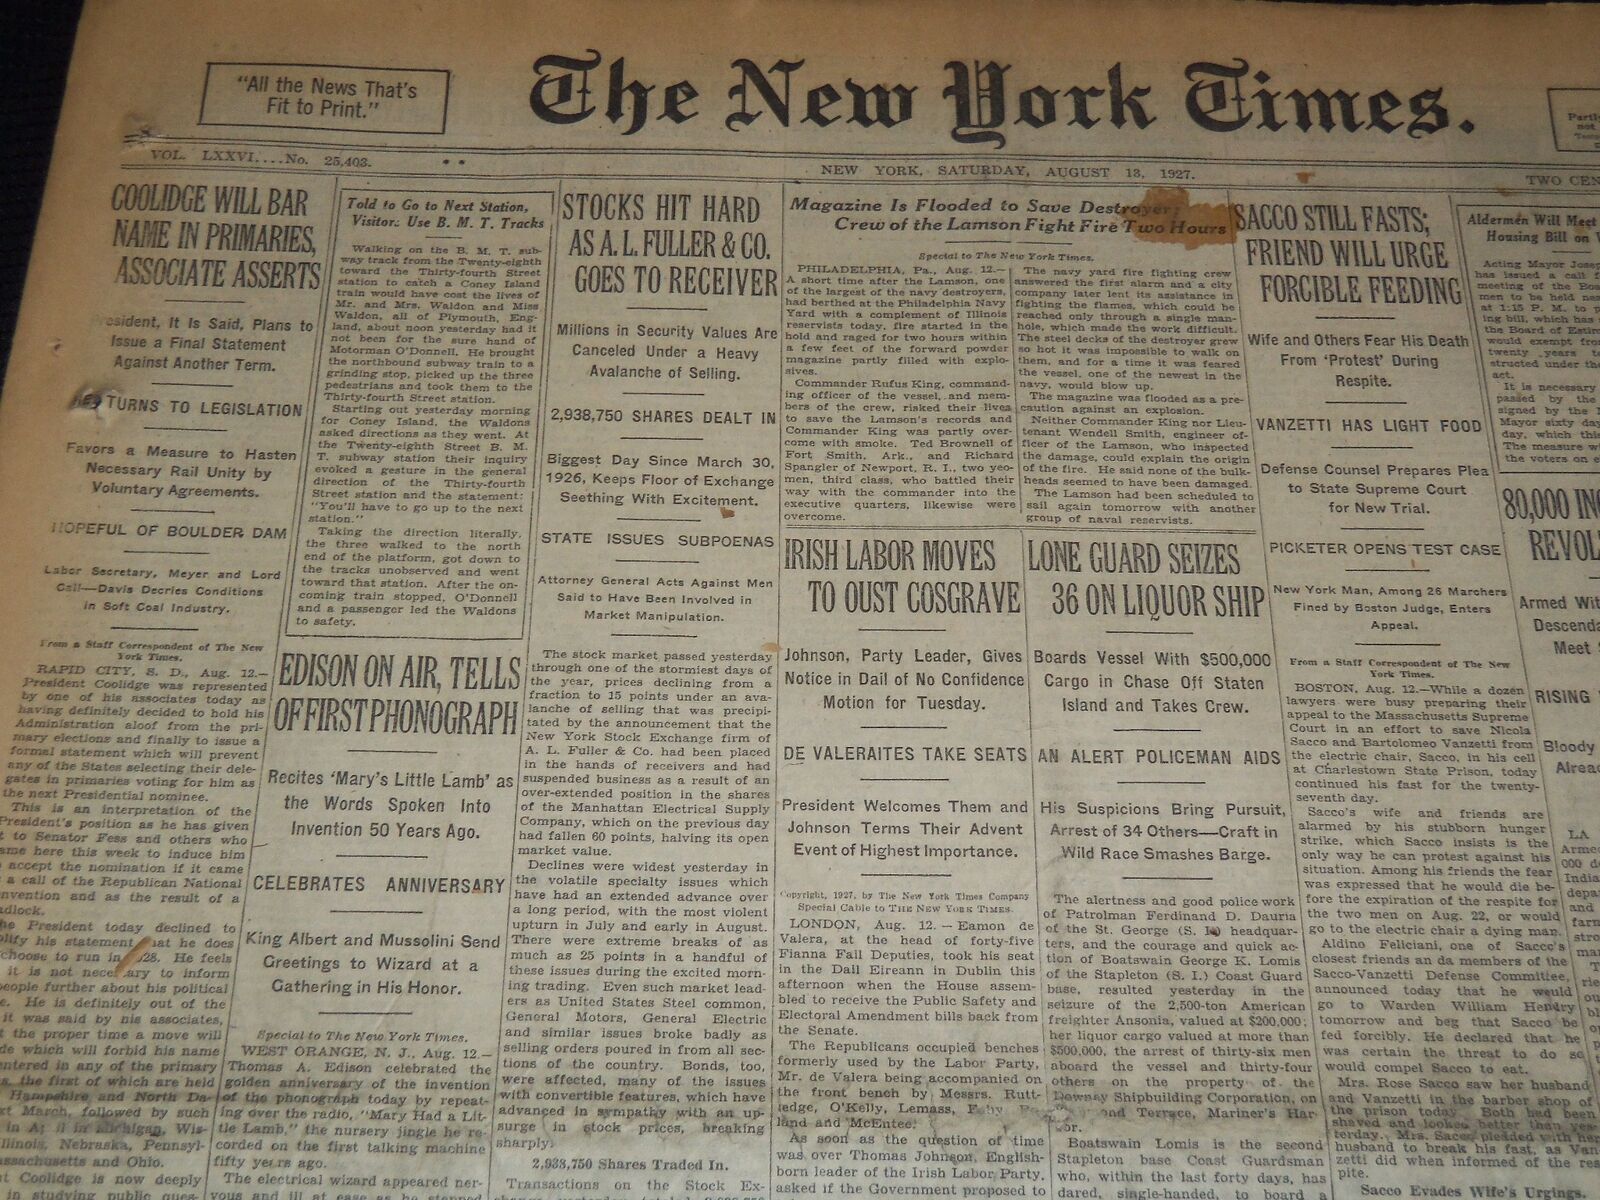 1927 AUGUST 13 NEW YORK TIMES - SACCO STILL FASTS EDISON ON AIR - NT 9566